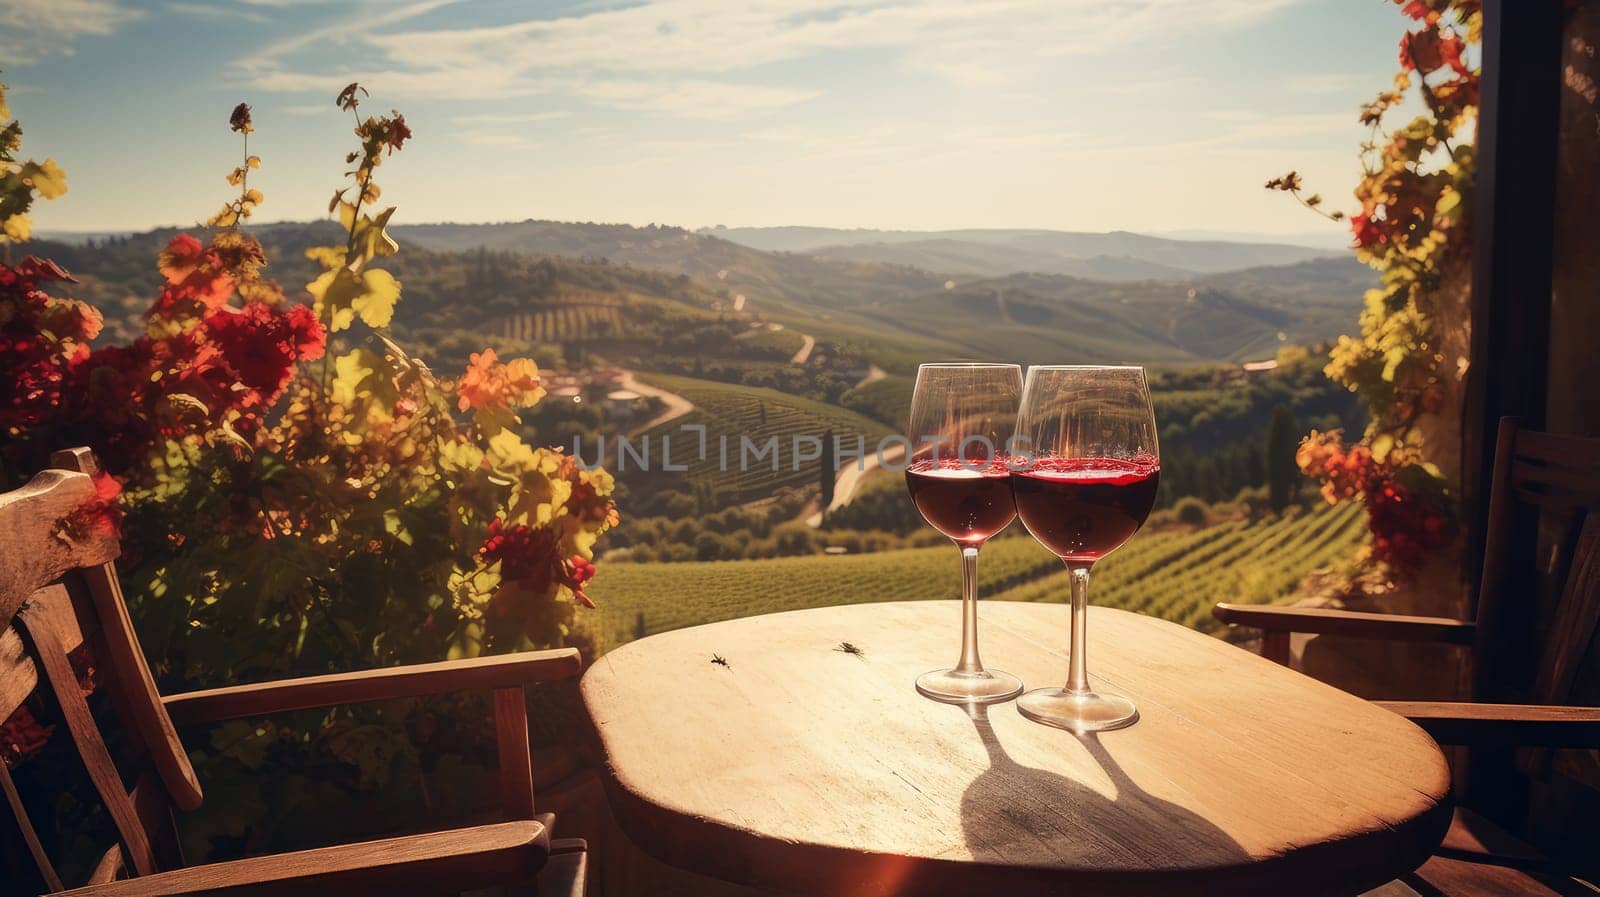 Red wine swirls in a glass. A bush of grapes before harvest. A hand holds a glass of white wine against a vineyard in the background of a rural landscape during sunset. Wine making, vineyards, tourism business, small and private business,